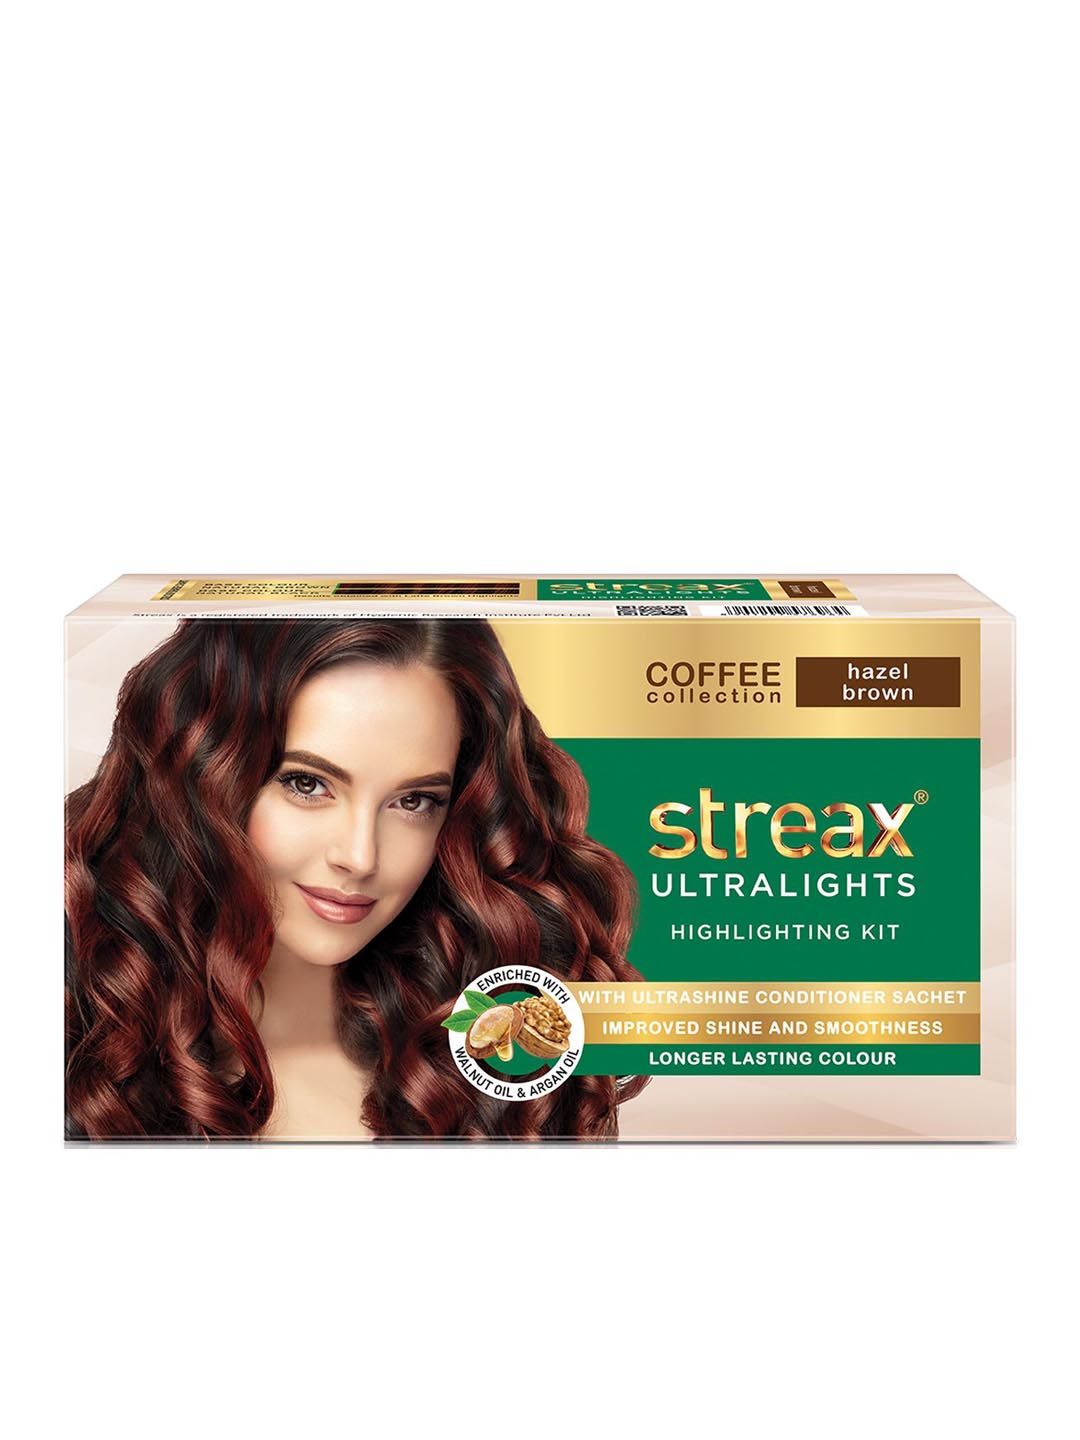 Streax Coffee Collection Ultralights Highlighting Kit - Hazel Brown 80ml Price in India